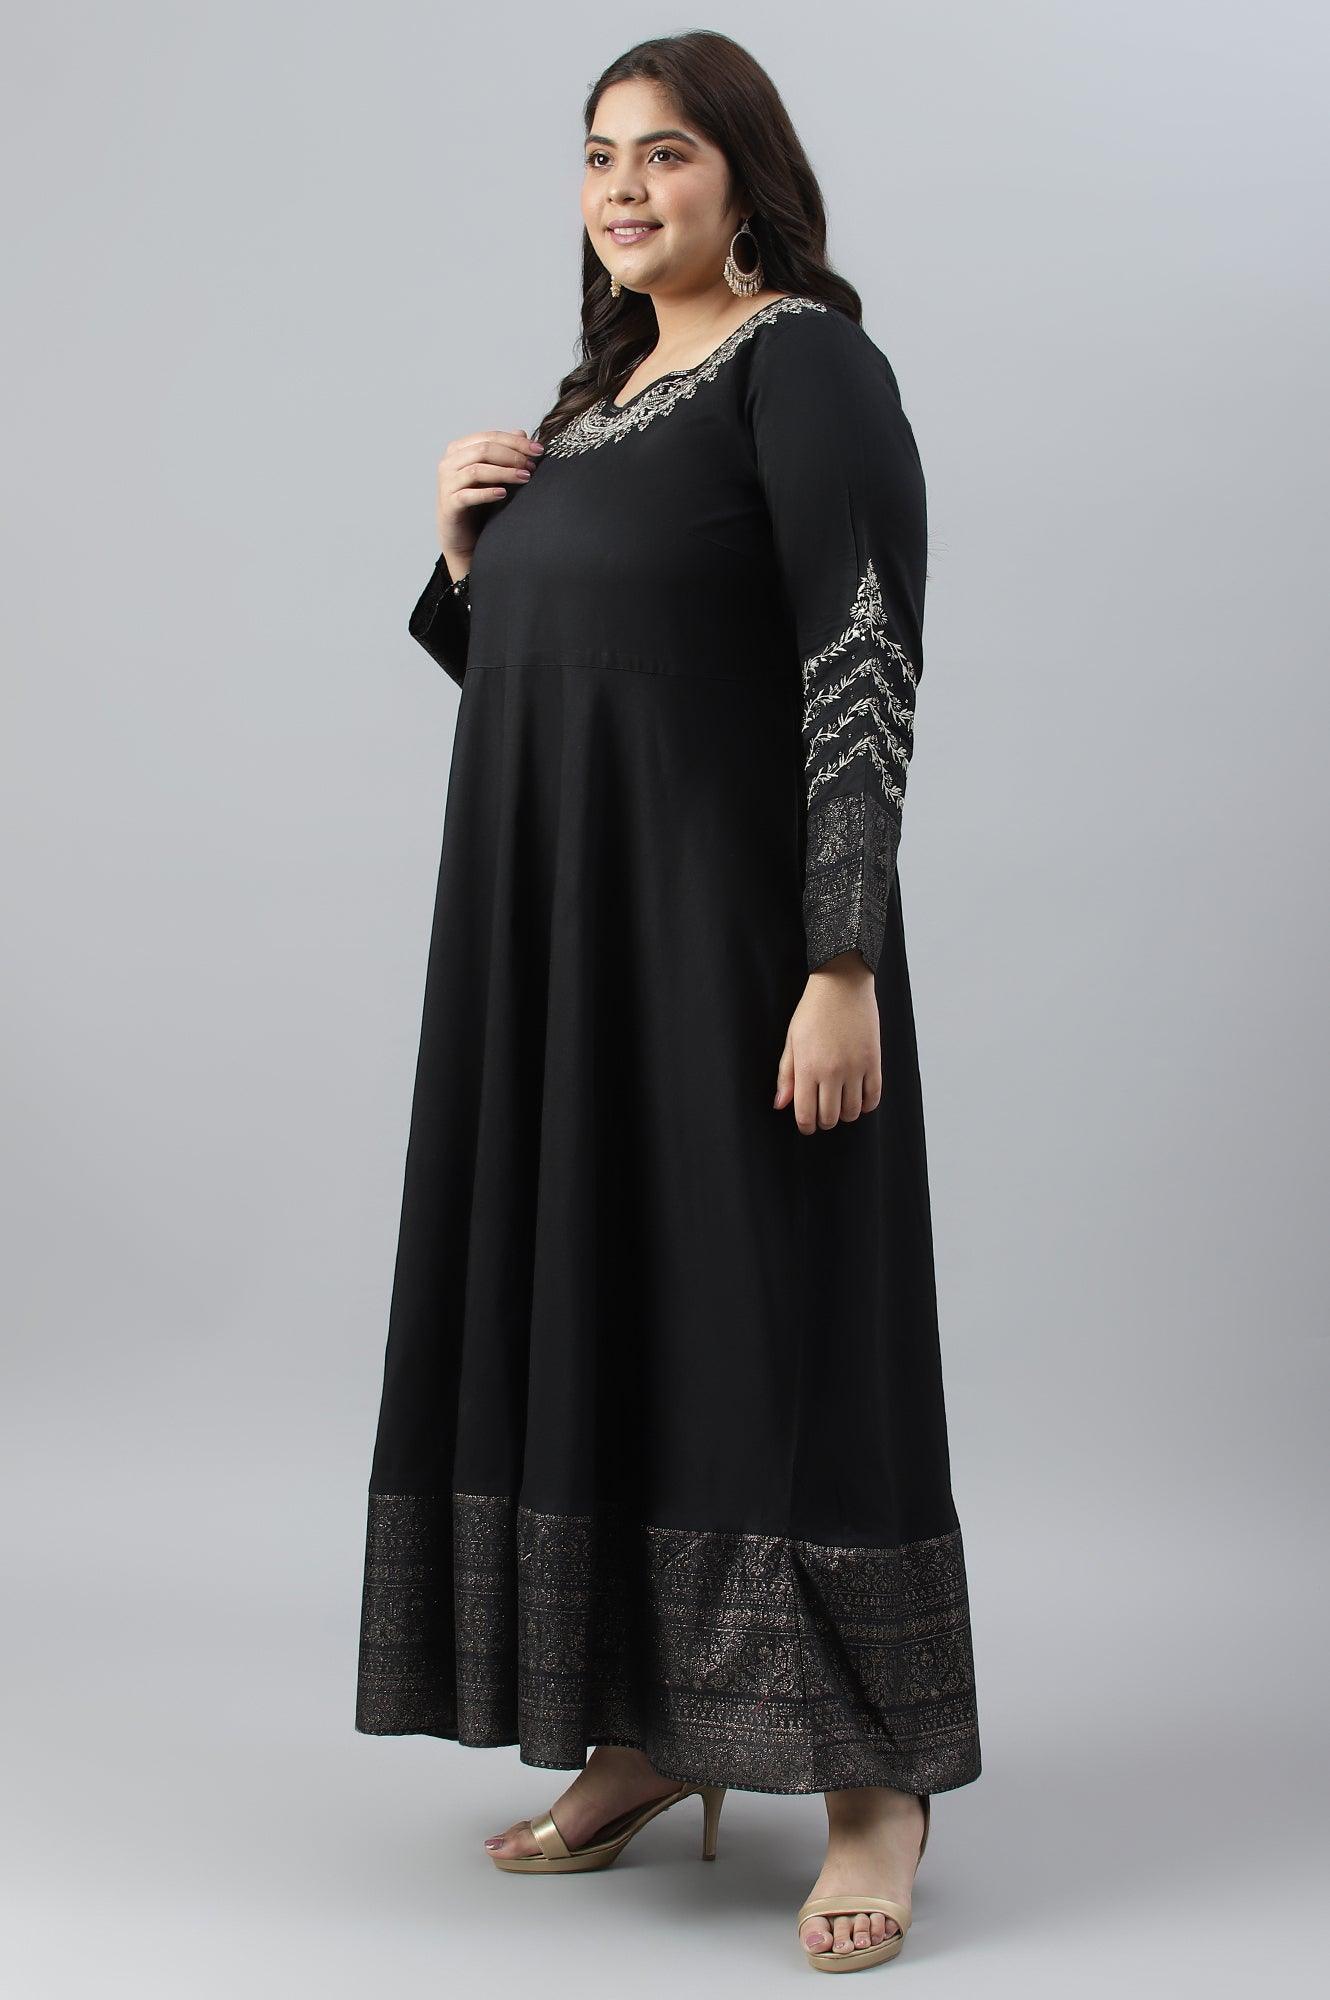 Black Glitter Printed And Embroidered Plus Size Dress - wforwoman